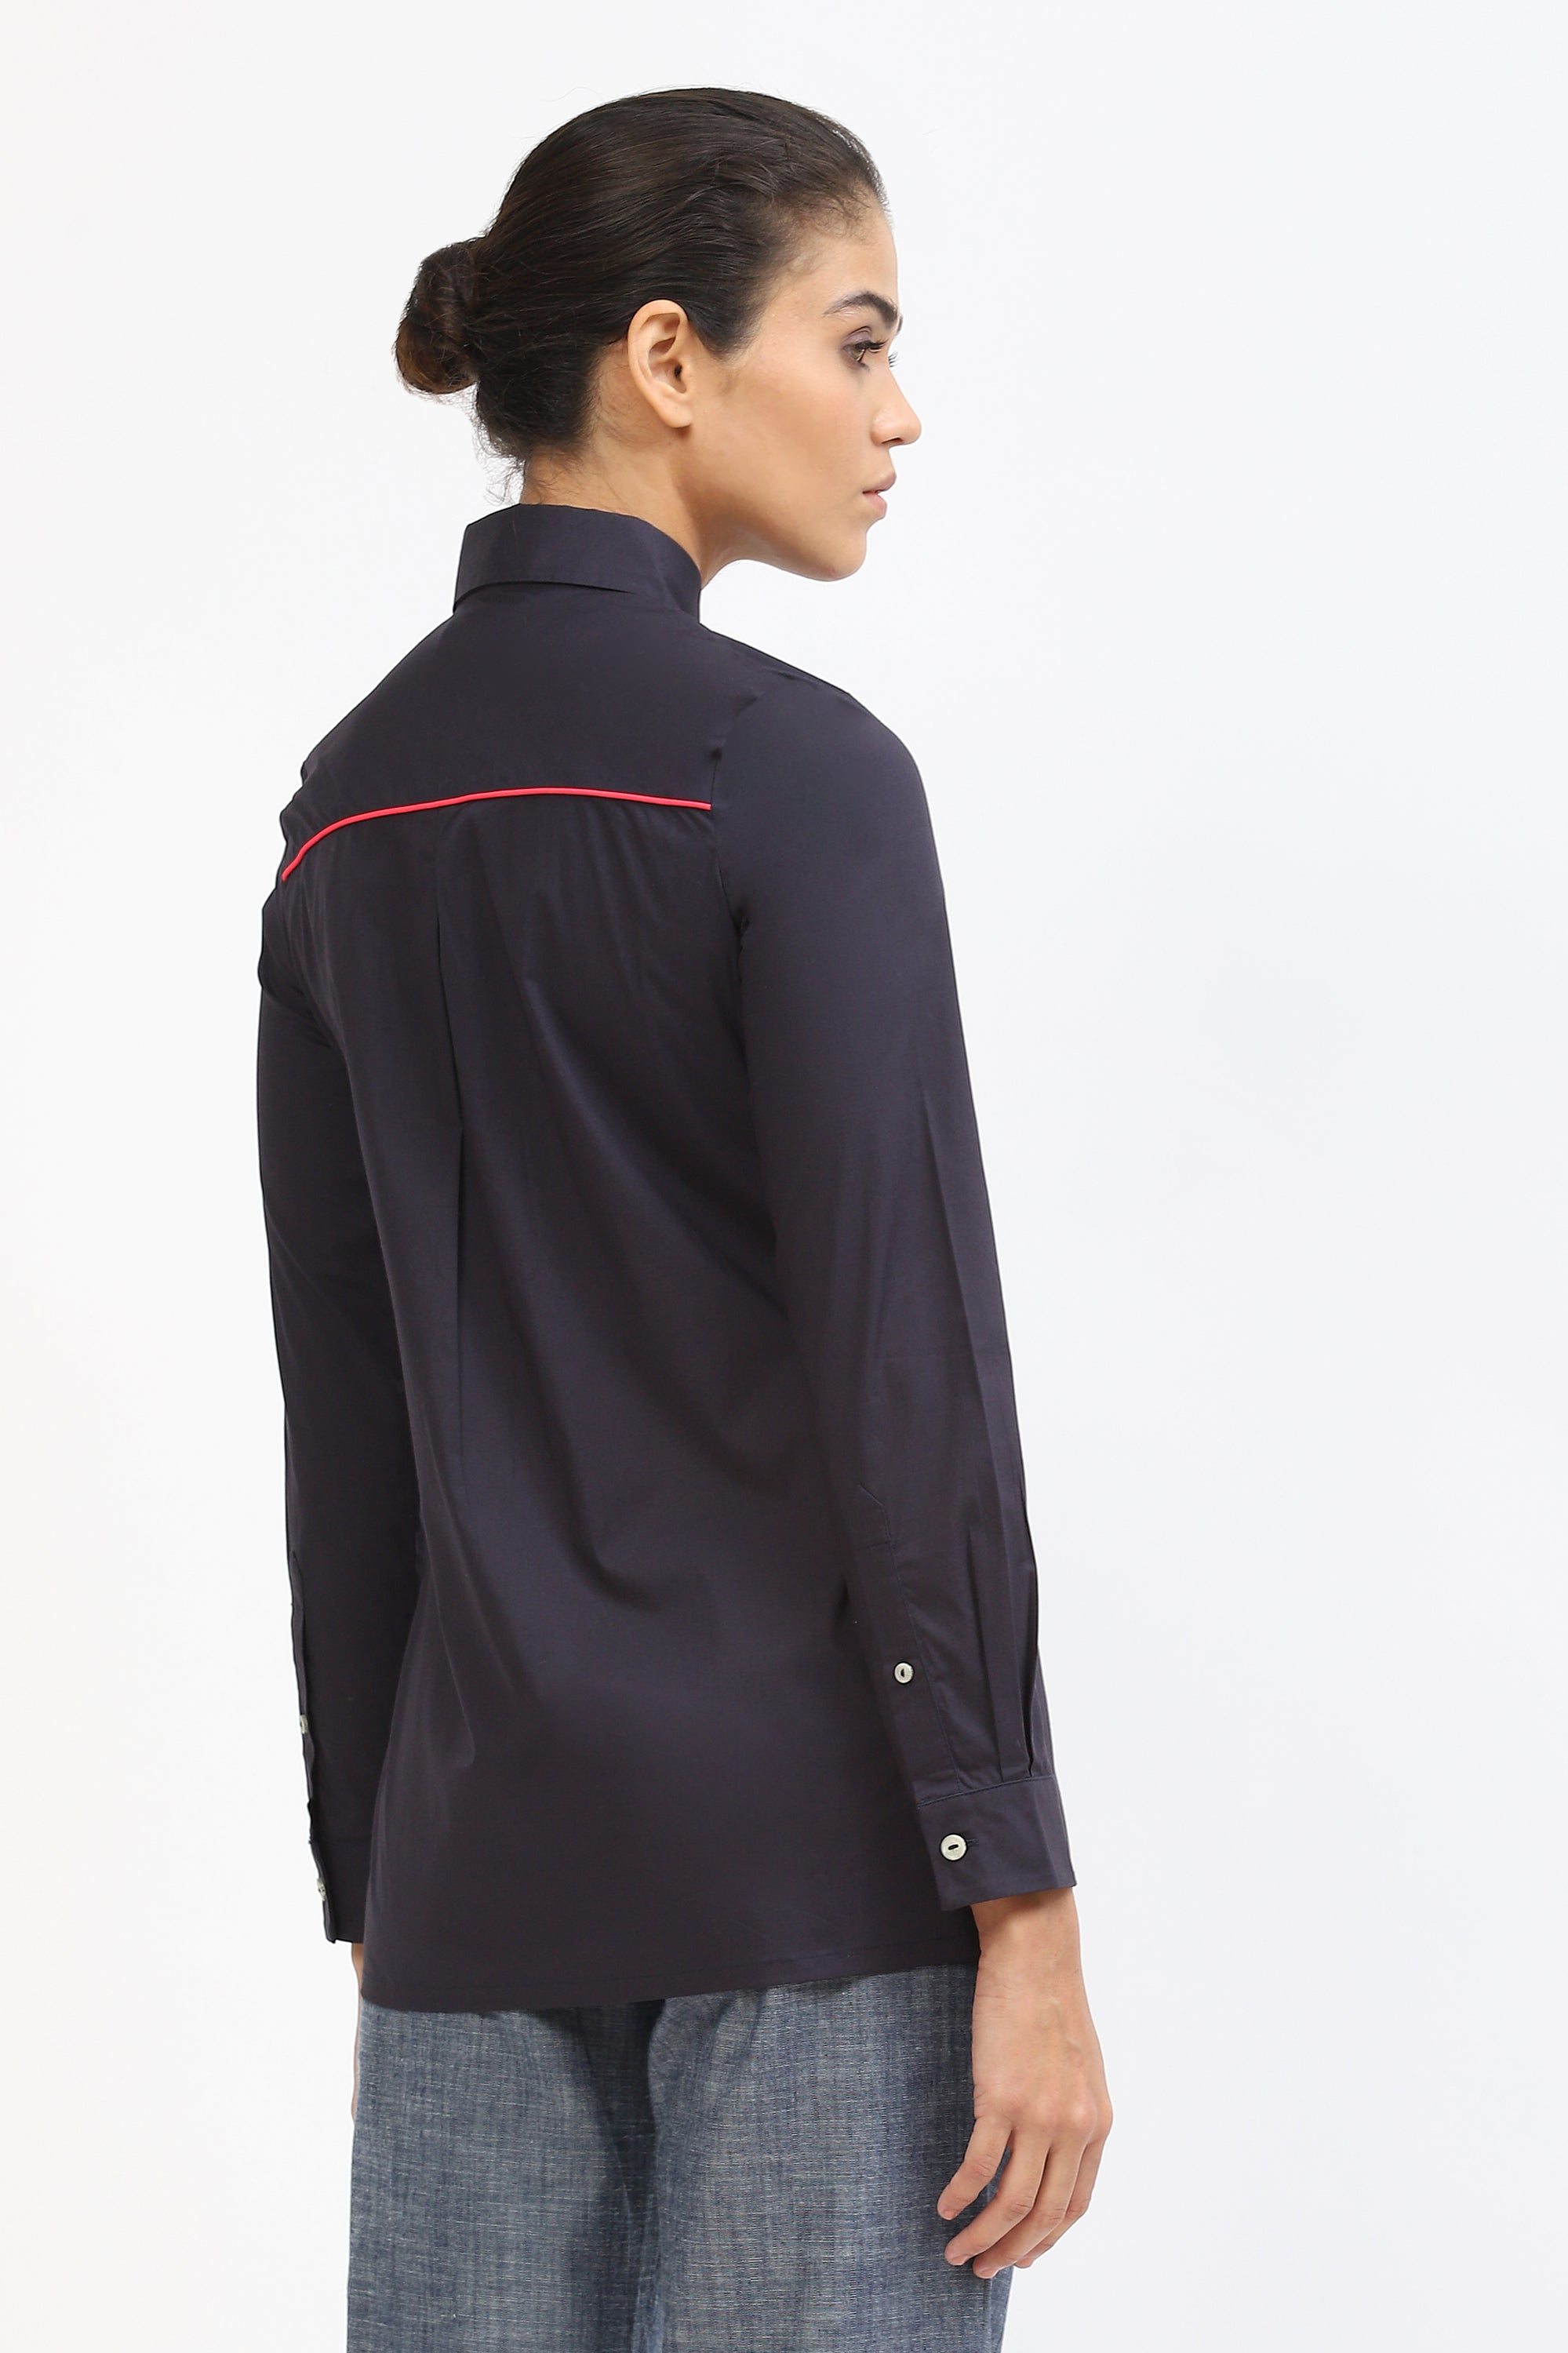 Womens Shirt With Contrast Piping